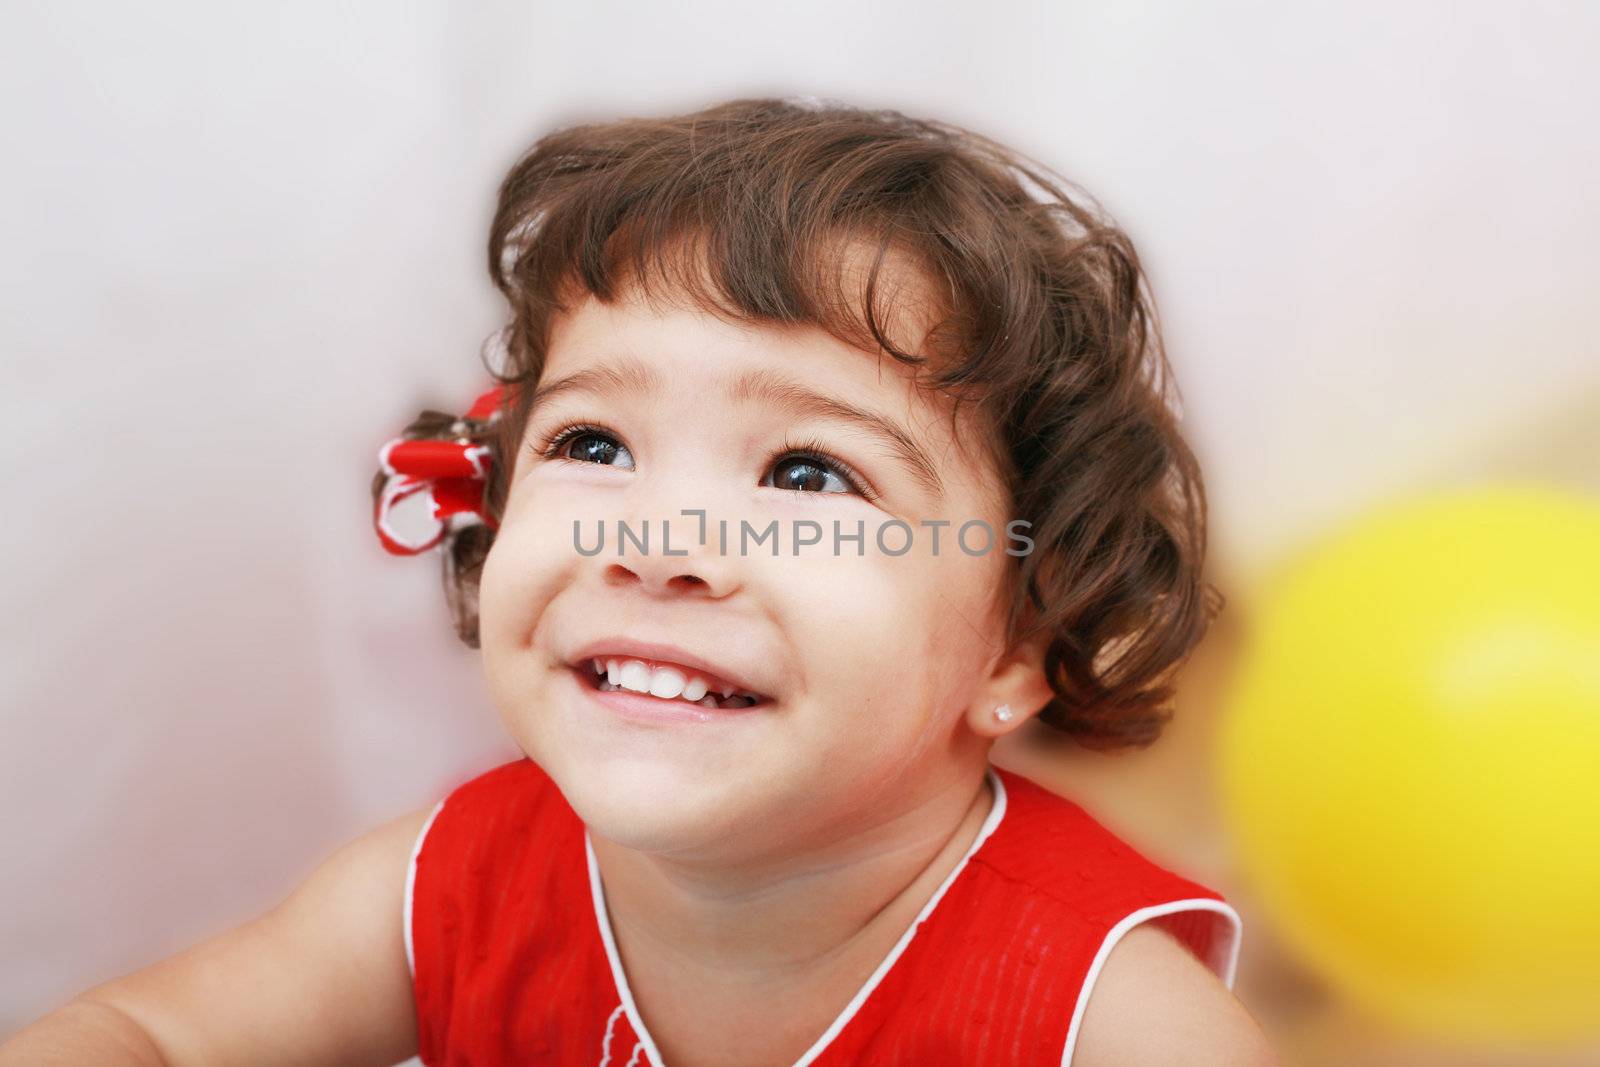 Two years old girl expressing happy over white background